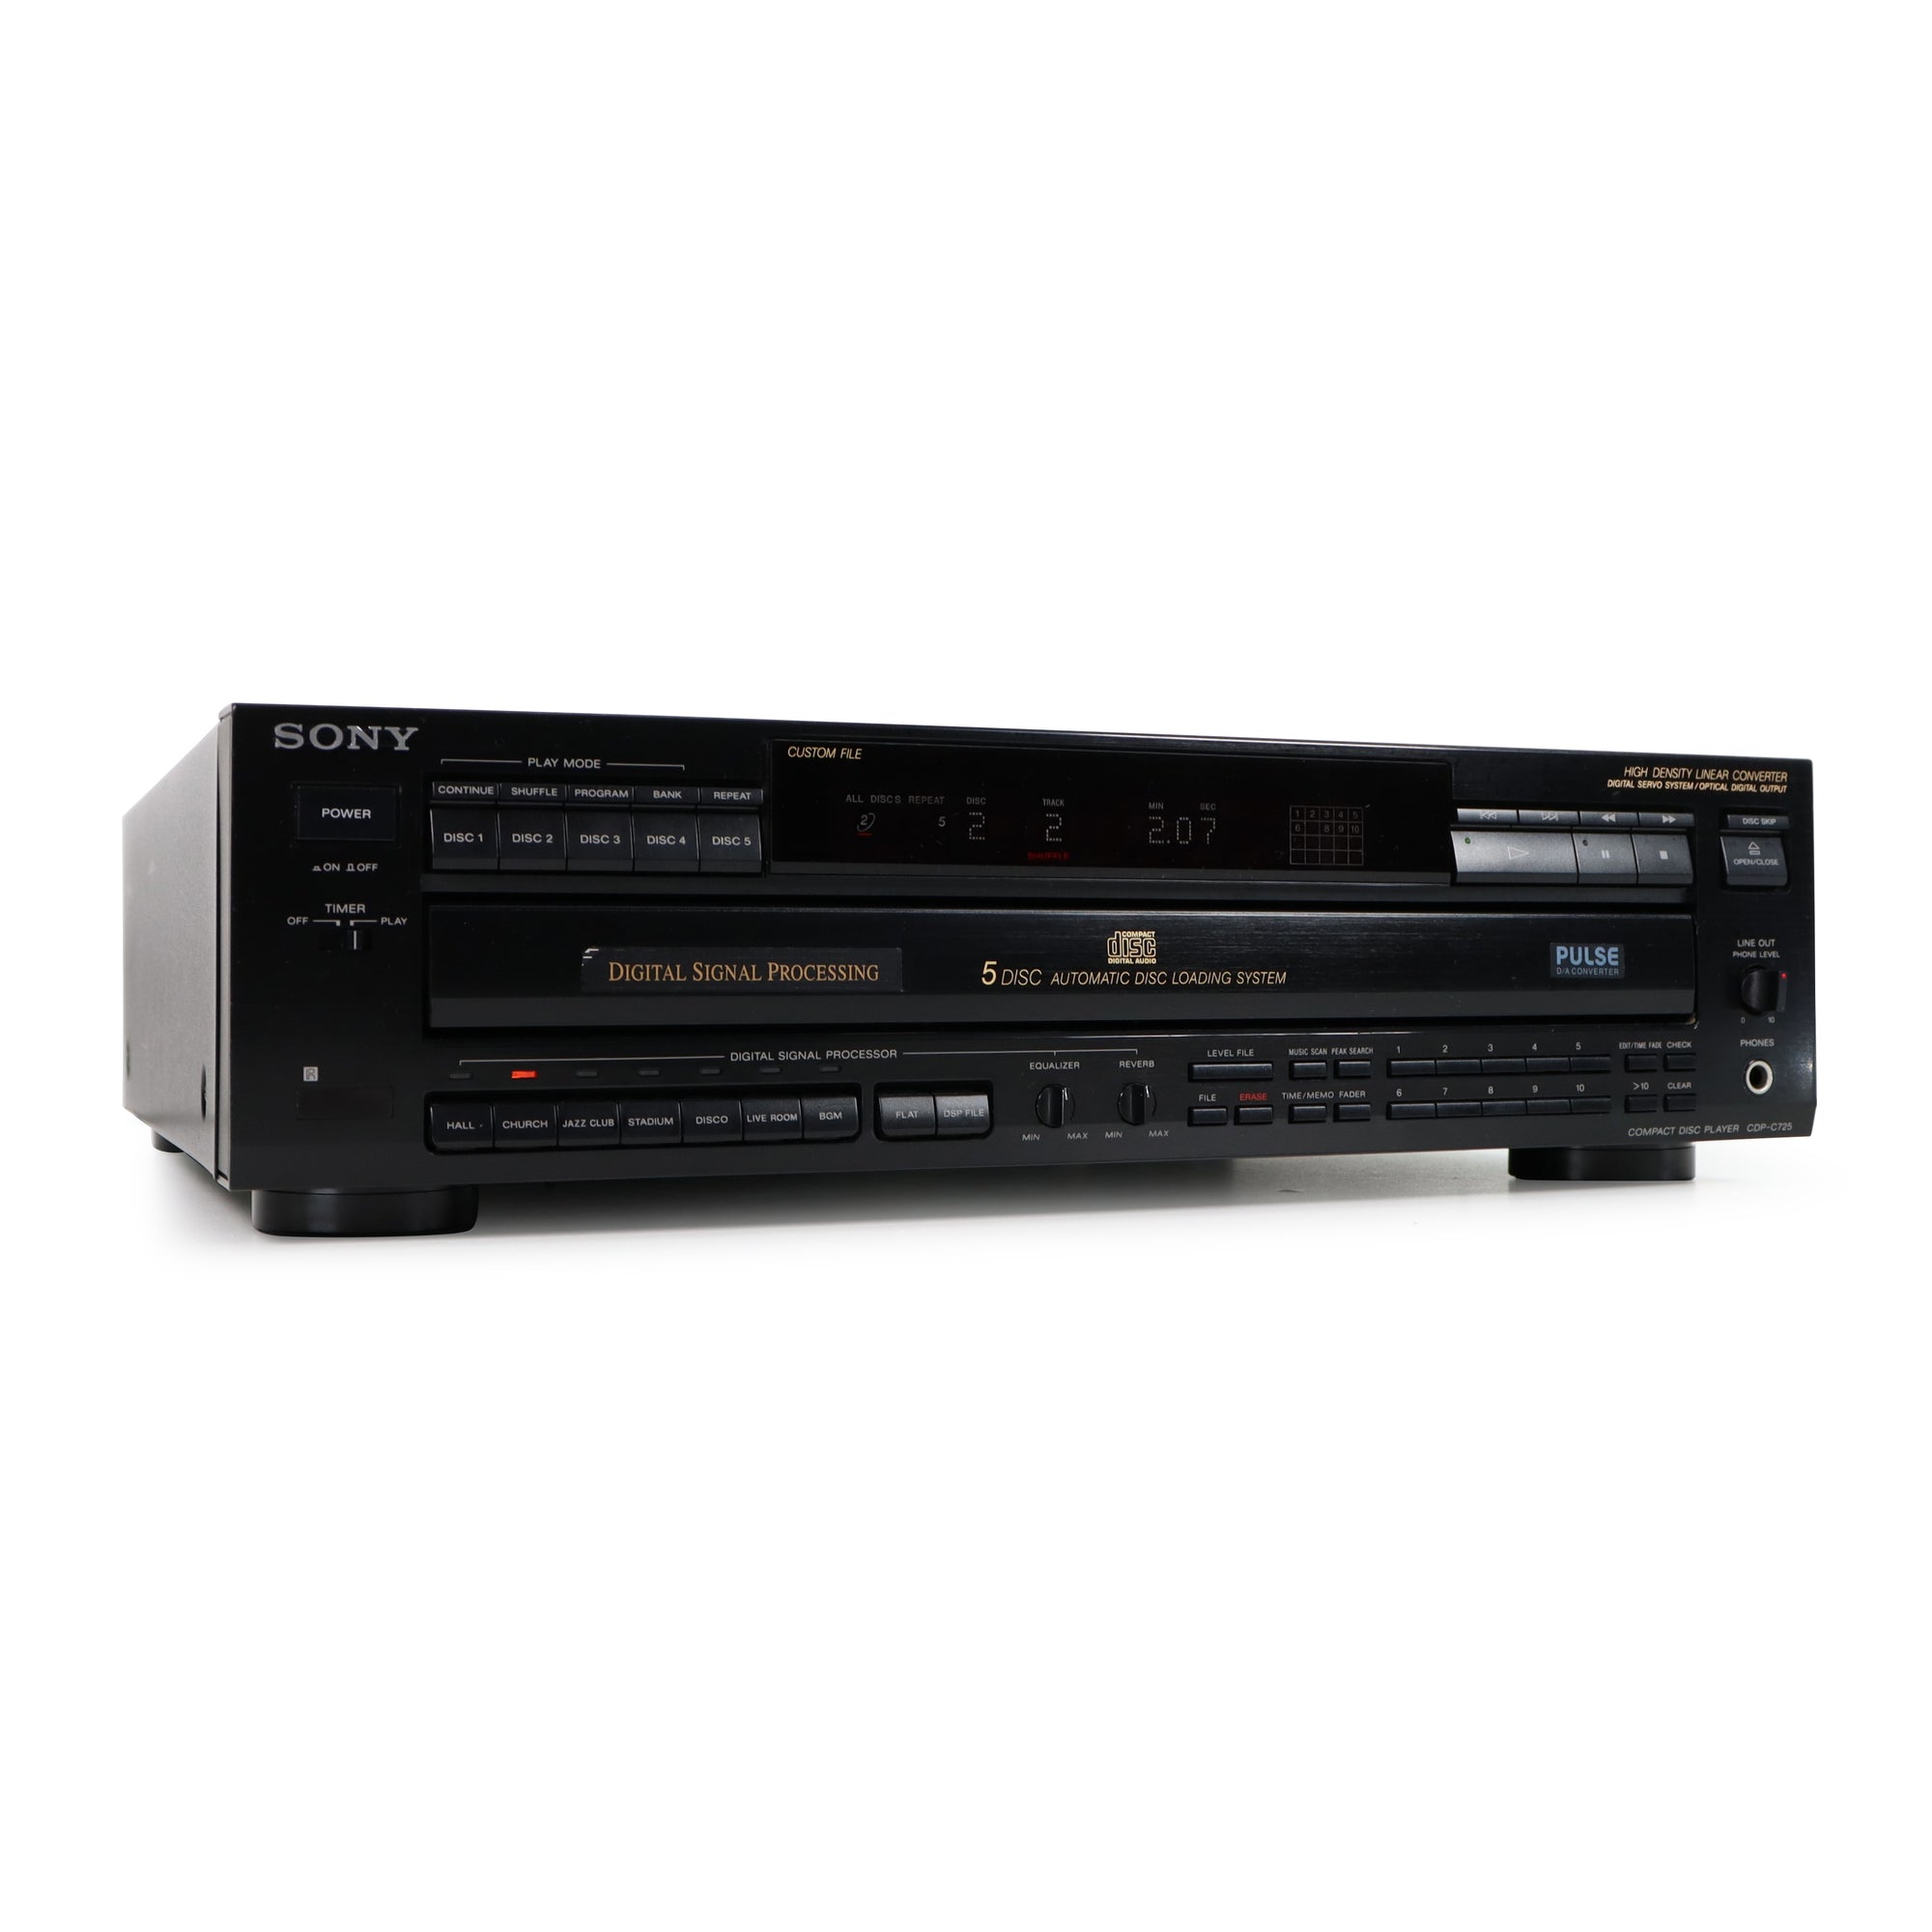 Sony 5 disc compact disc cd player changer carousel for home stereo audio system. Refurbished and SpenCertified.